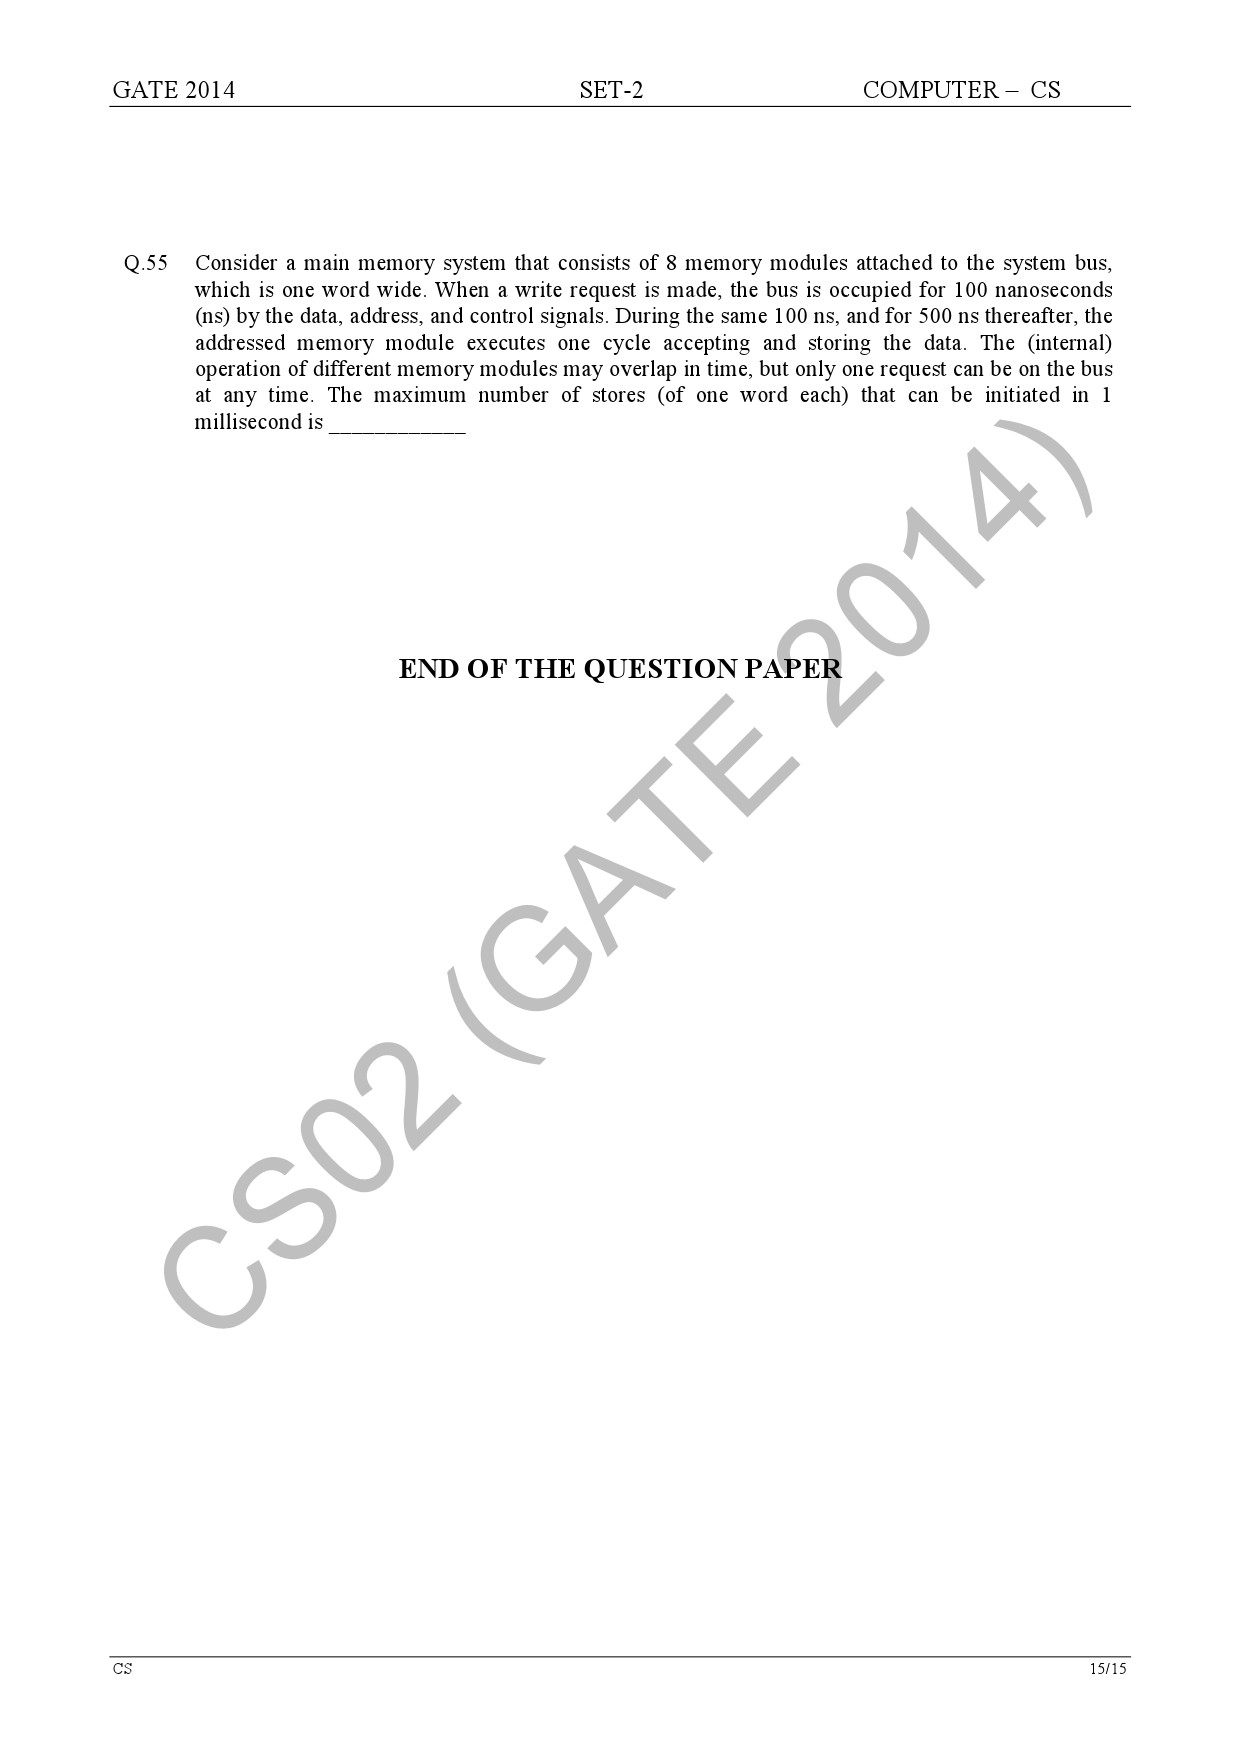 GATE Exam Question Paper 2014 Computer Science and Information Technology Set 2 21